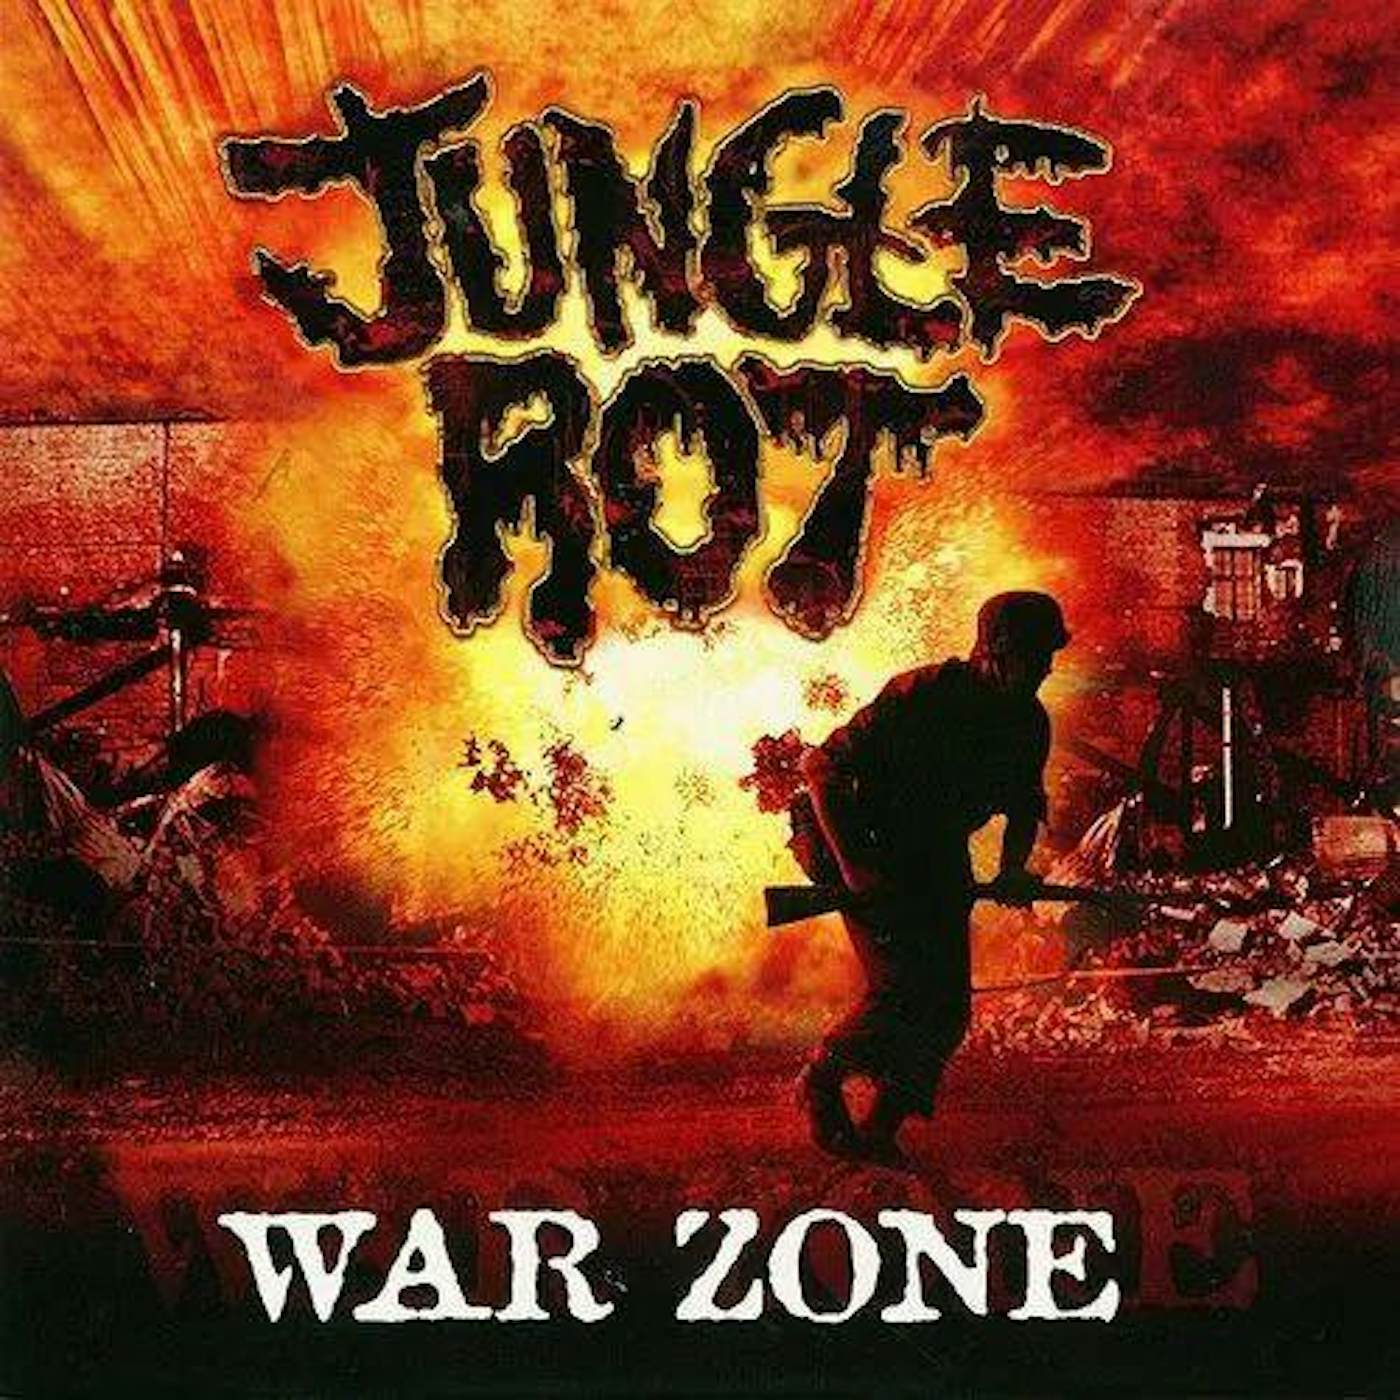 Jungle Rot War Zone (Red Vinyl Record)